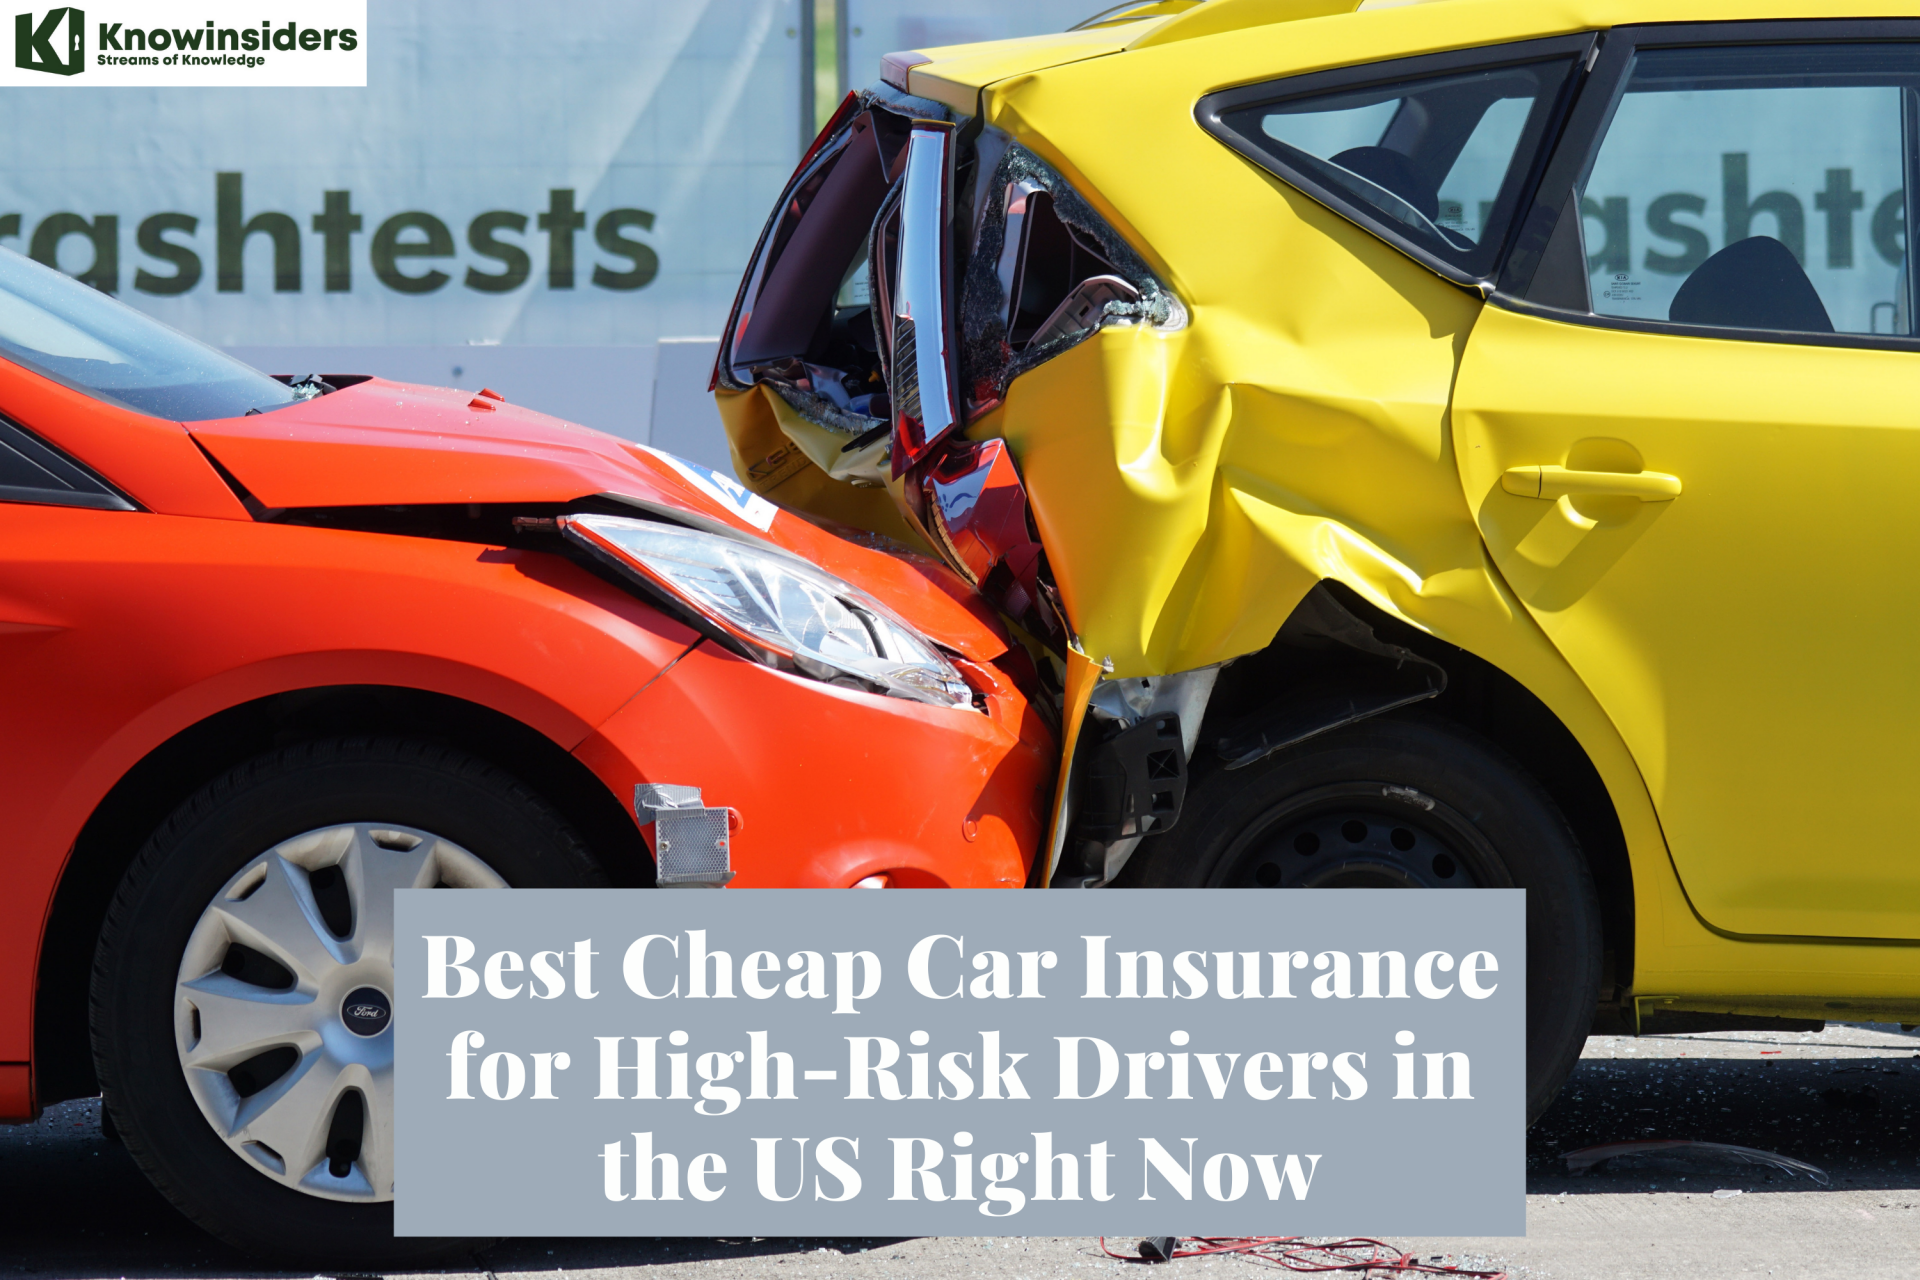 Best Cheap Car Insurance for High-Risk Drivers in the US Right Now